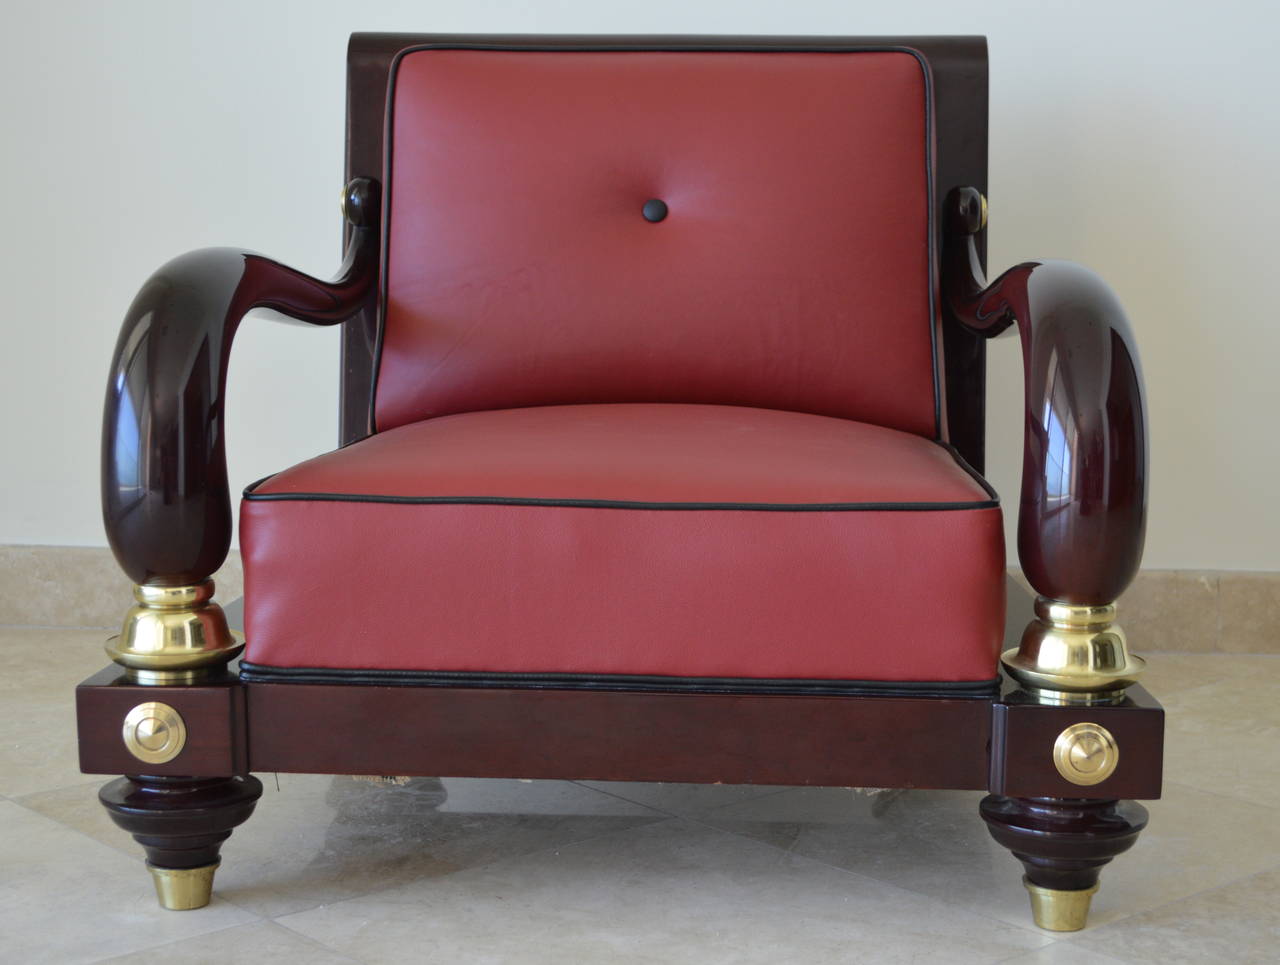 Mexican Rare 1950s Octavio Vidales Sculptural Chairs in Lacquered Mahogany and Leather For Sale